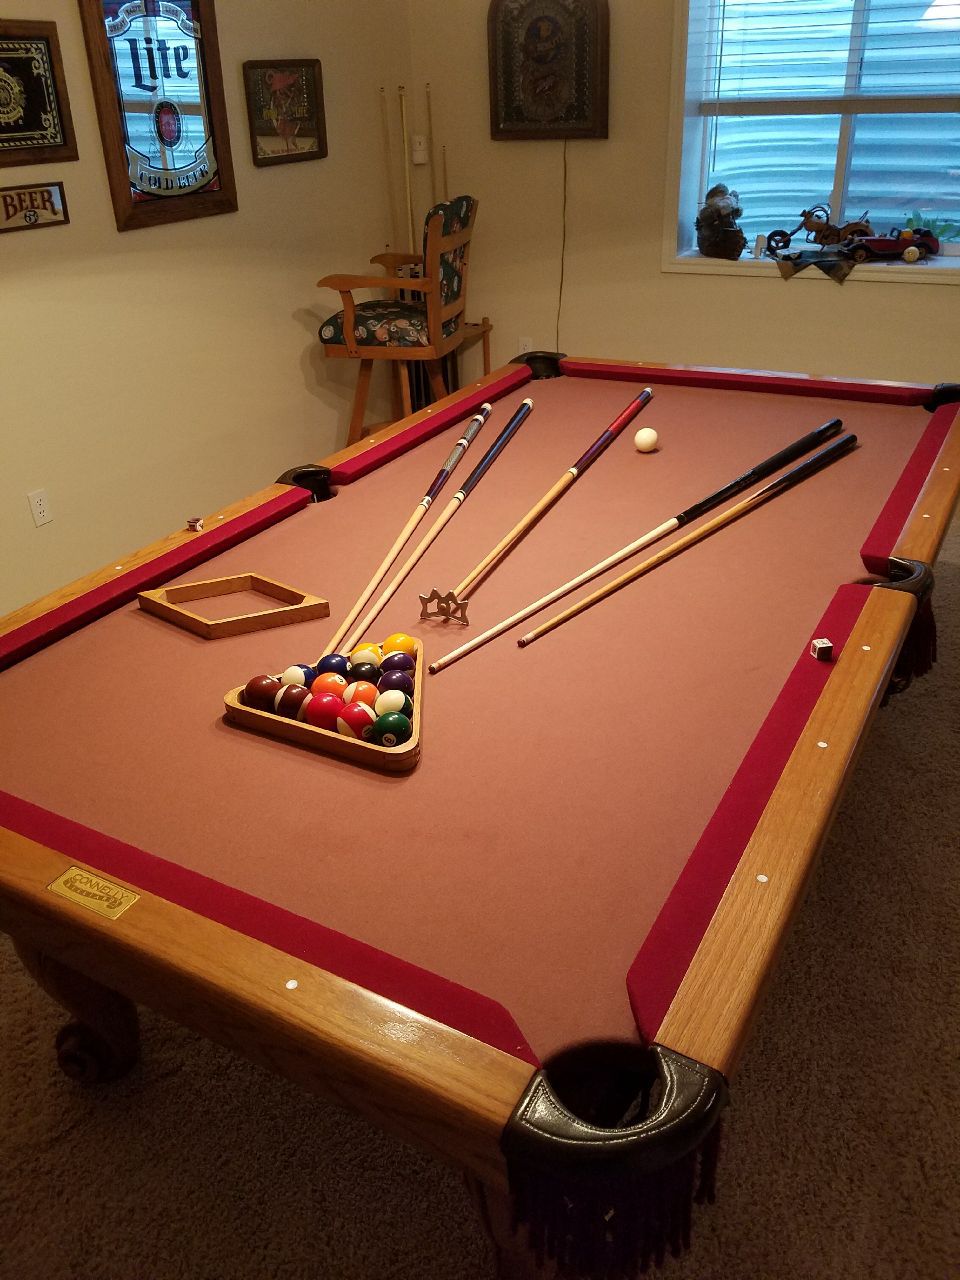 CONELLY FULL SIZE POOL TABLE&PUB TABLE ALL ACCESSORIES LIKE NEW RETAIL $3,500